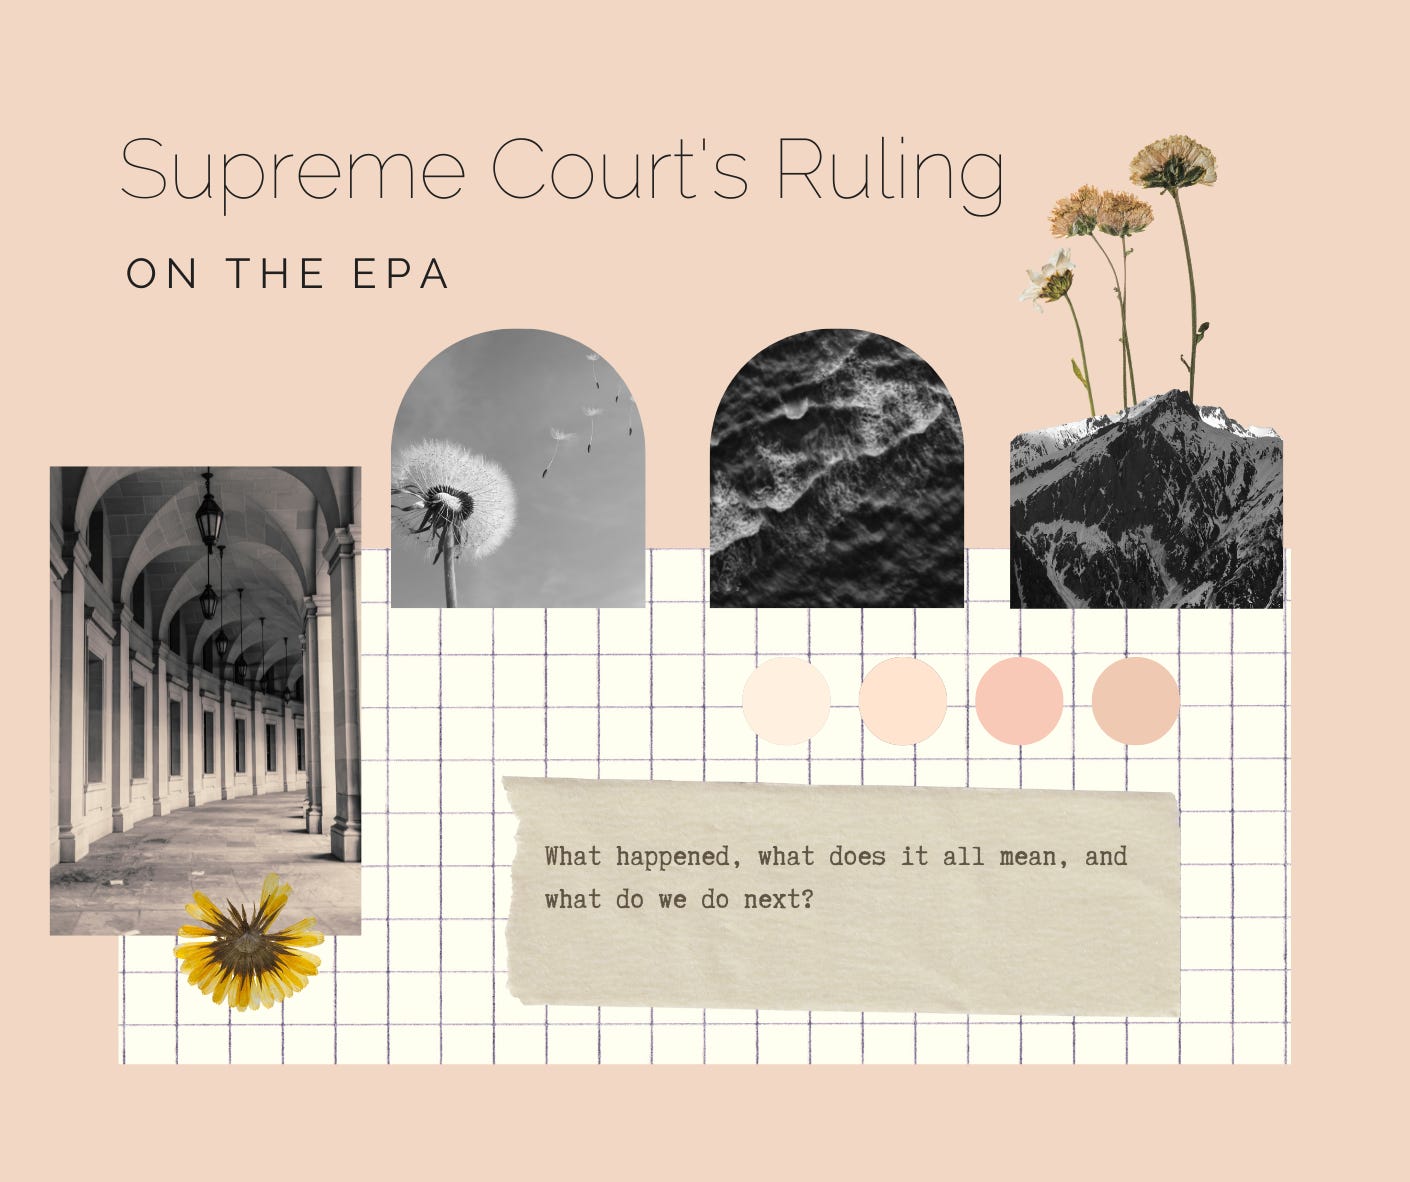 Supreme Court's Ruling on the EPA. What happened and what can we do next?